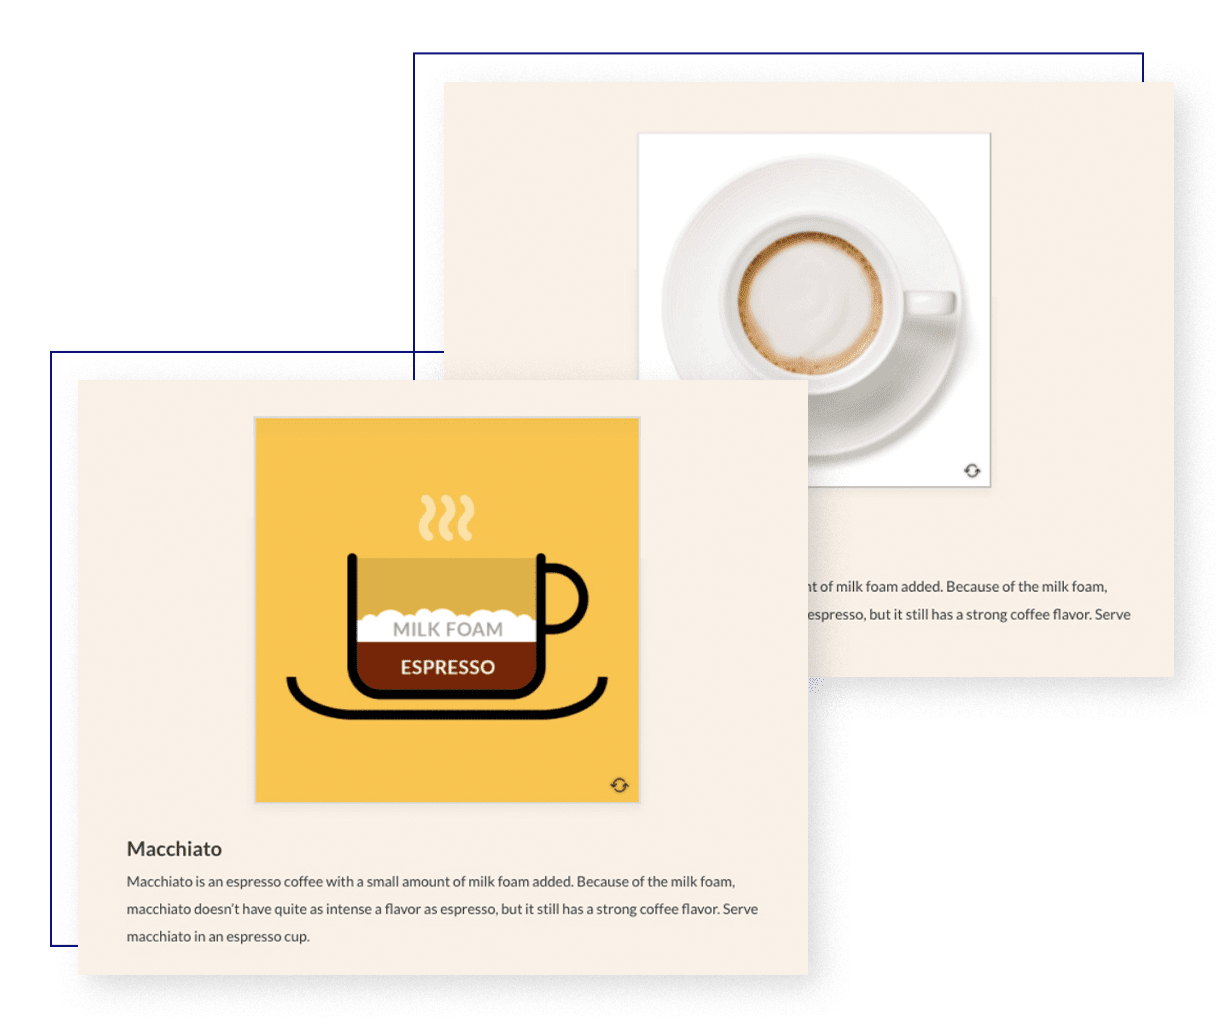 Flip cards in Rise featuring a Macchiato graphic and definition and a latte graphic and definition.